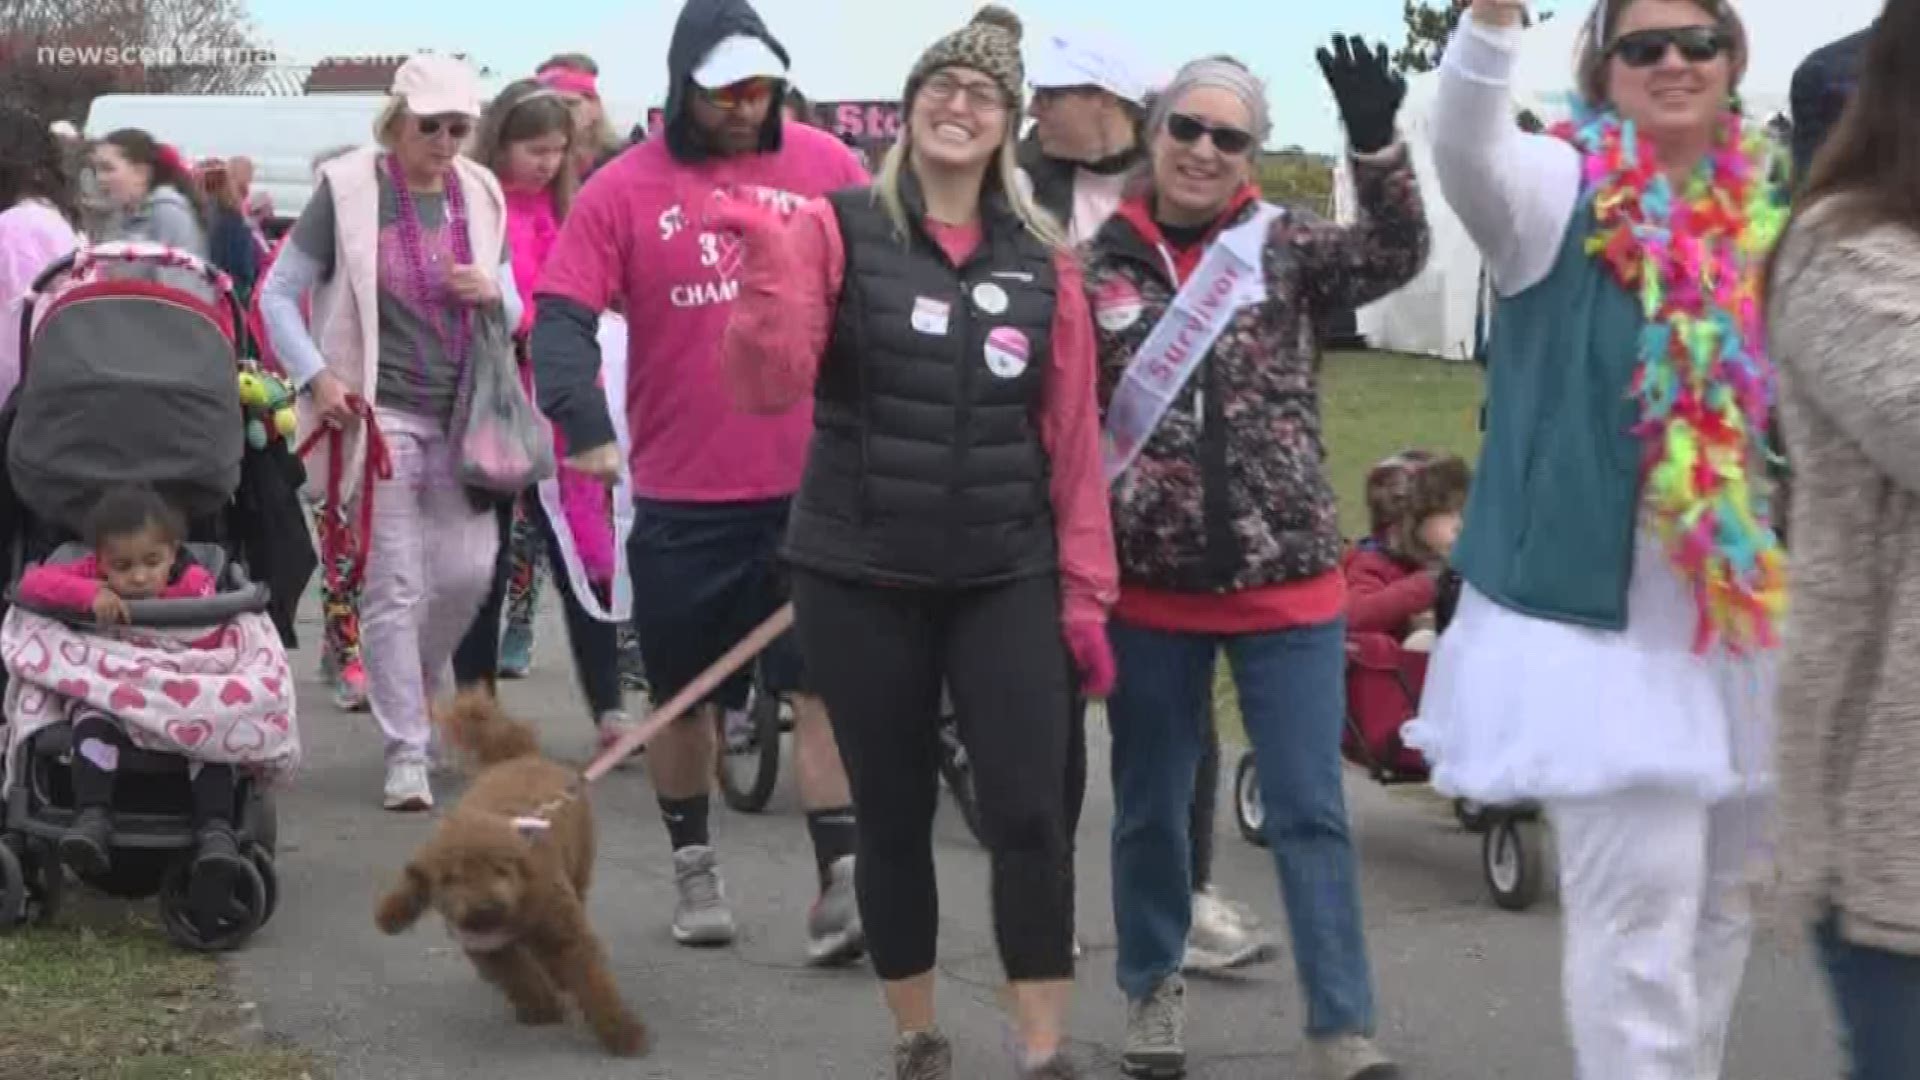 Hundreds of people gathered at Fort Williams in Cape Elizabeth to support people battling breast cancer.